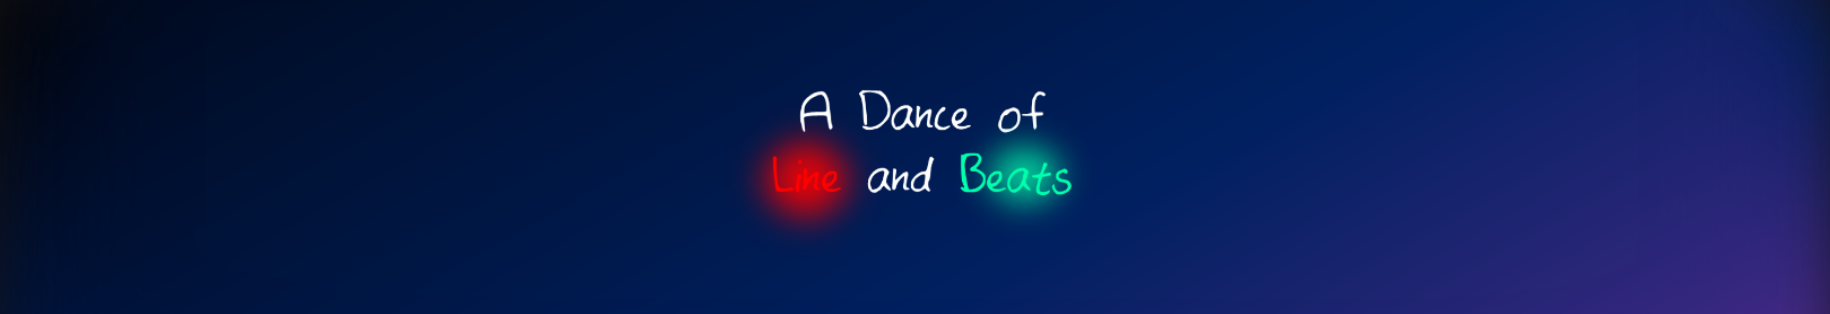 A Dance Of Line And Beats